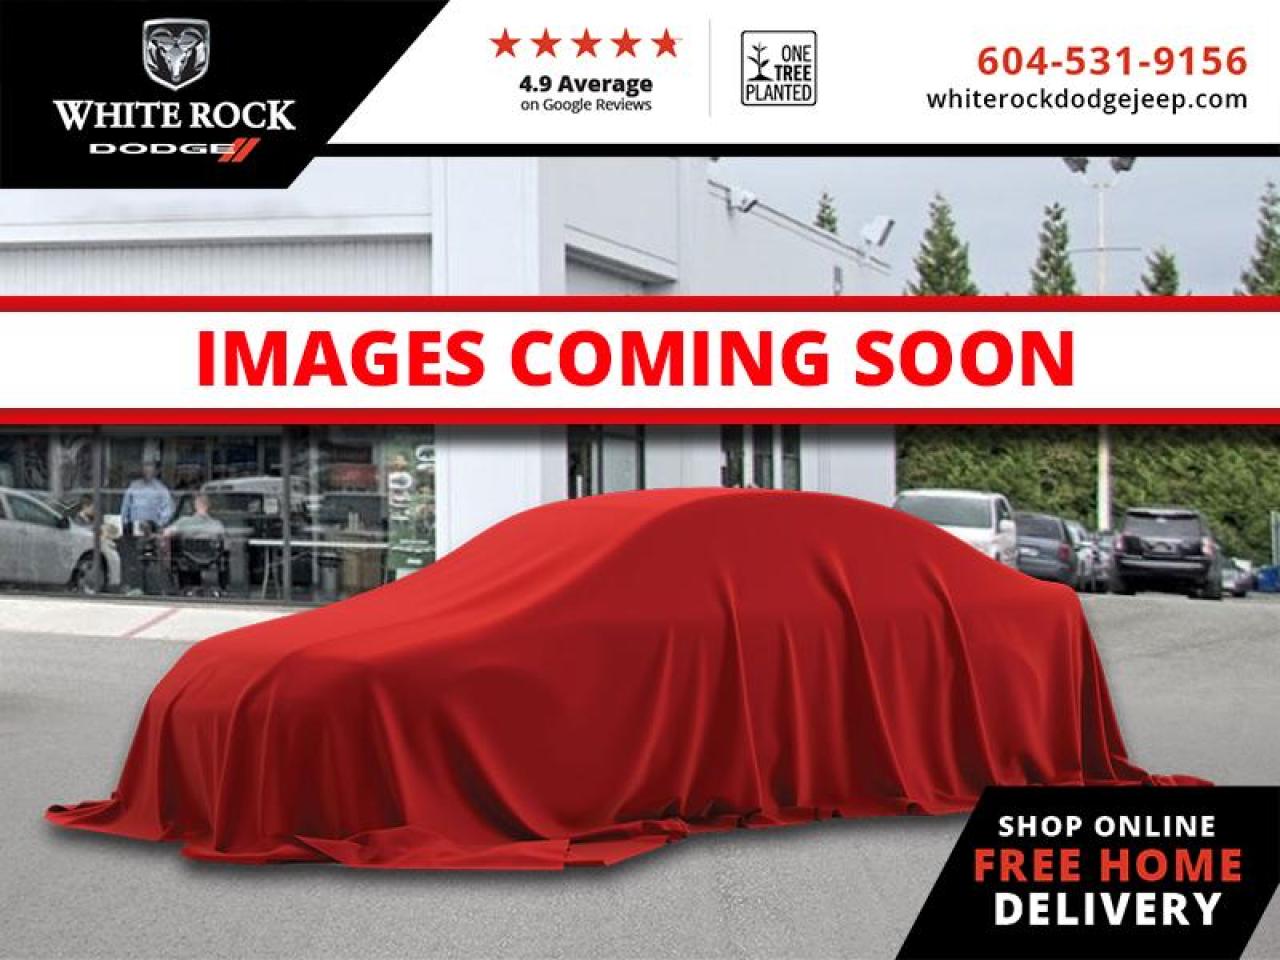 Used 2015 Dodge Challenger SXT Plus - Leather Seats for Sale in Surrey, British Columbia